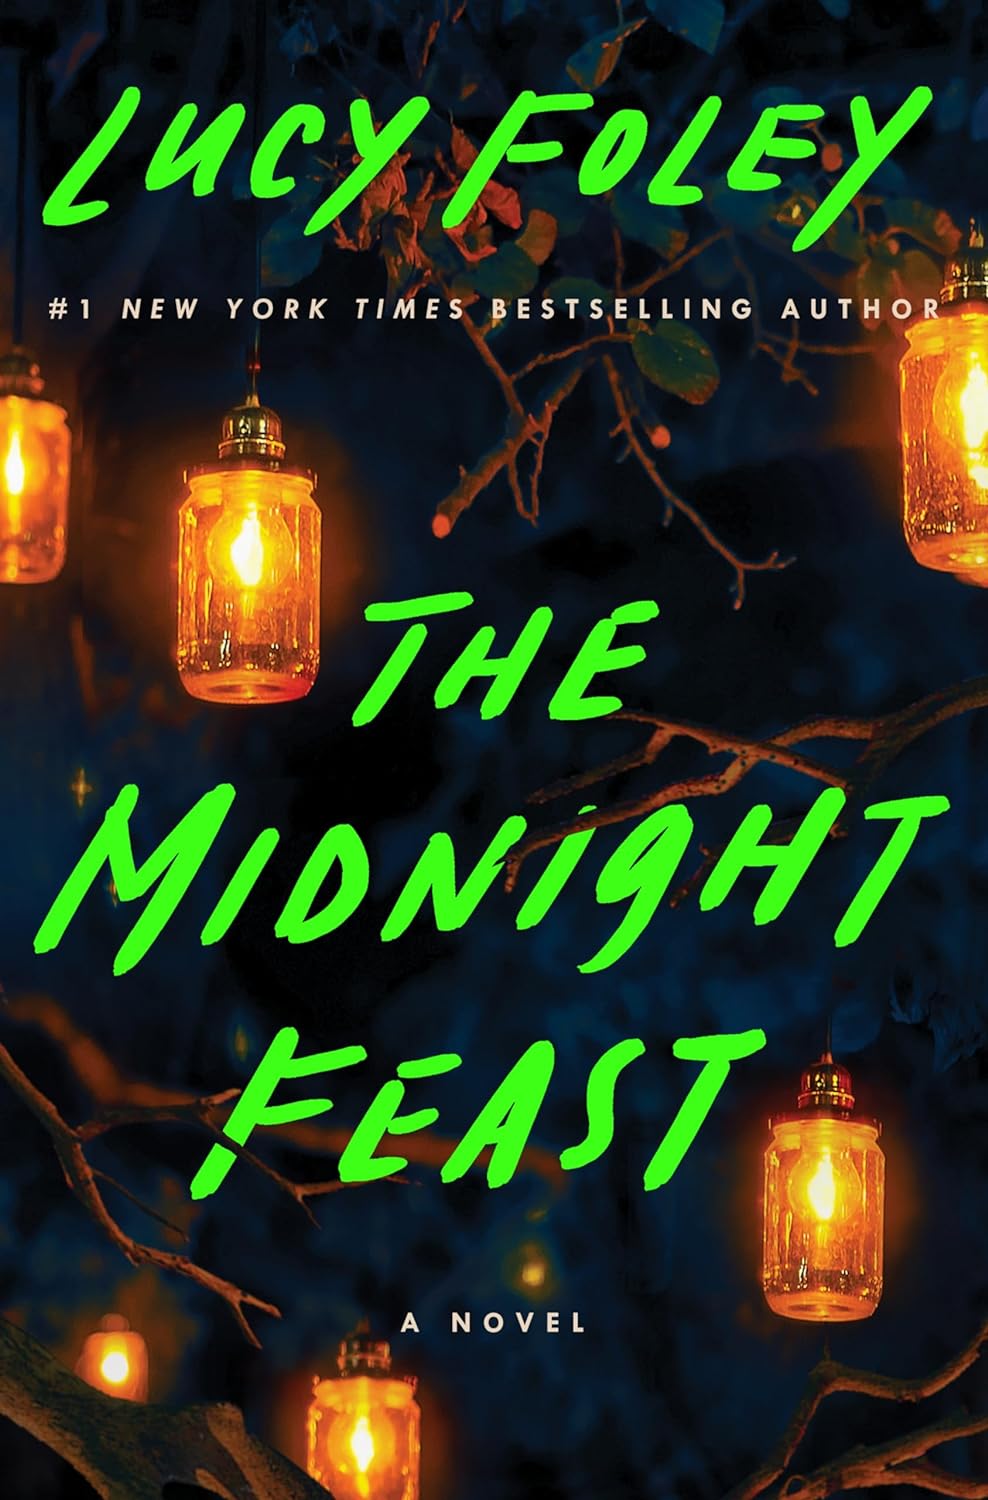 Image for "The Midnight Feast"